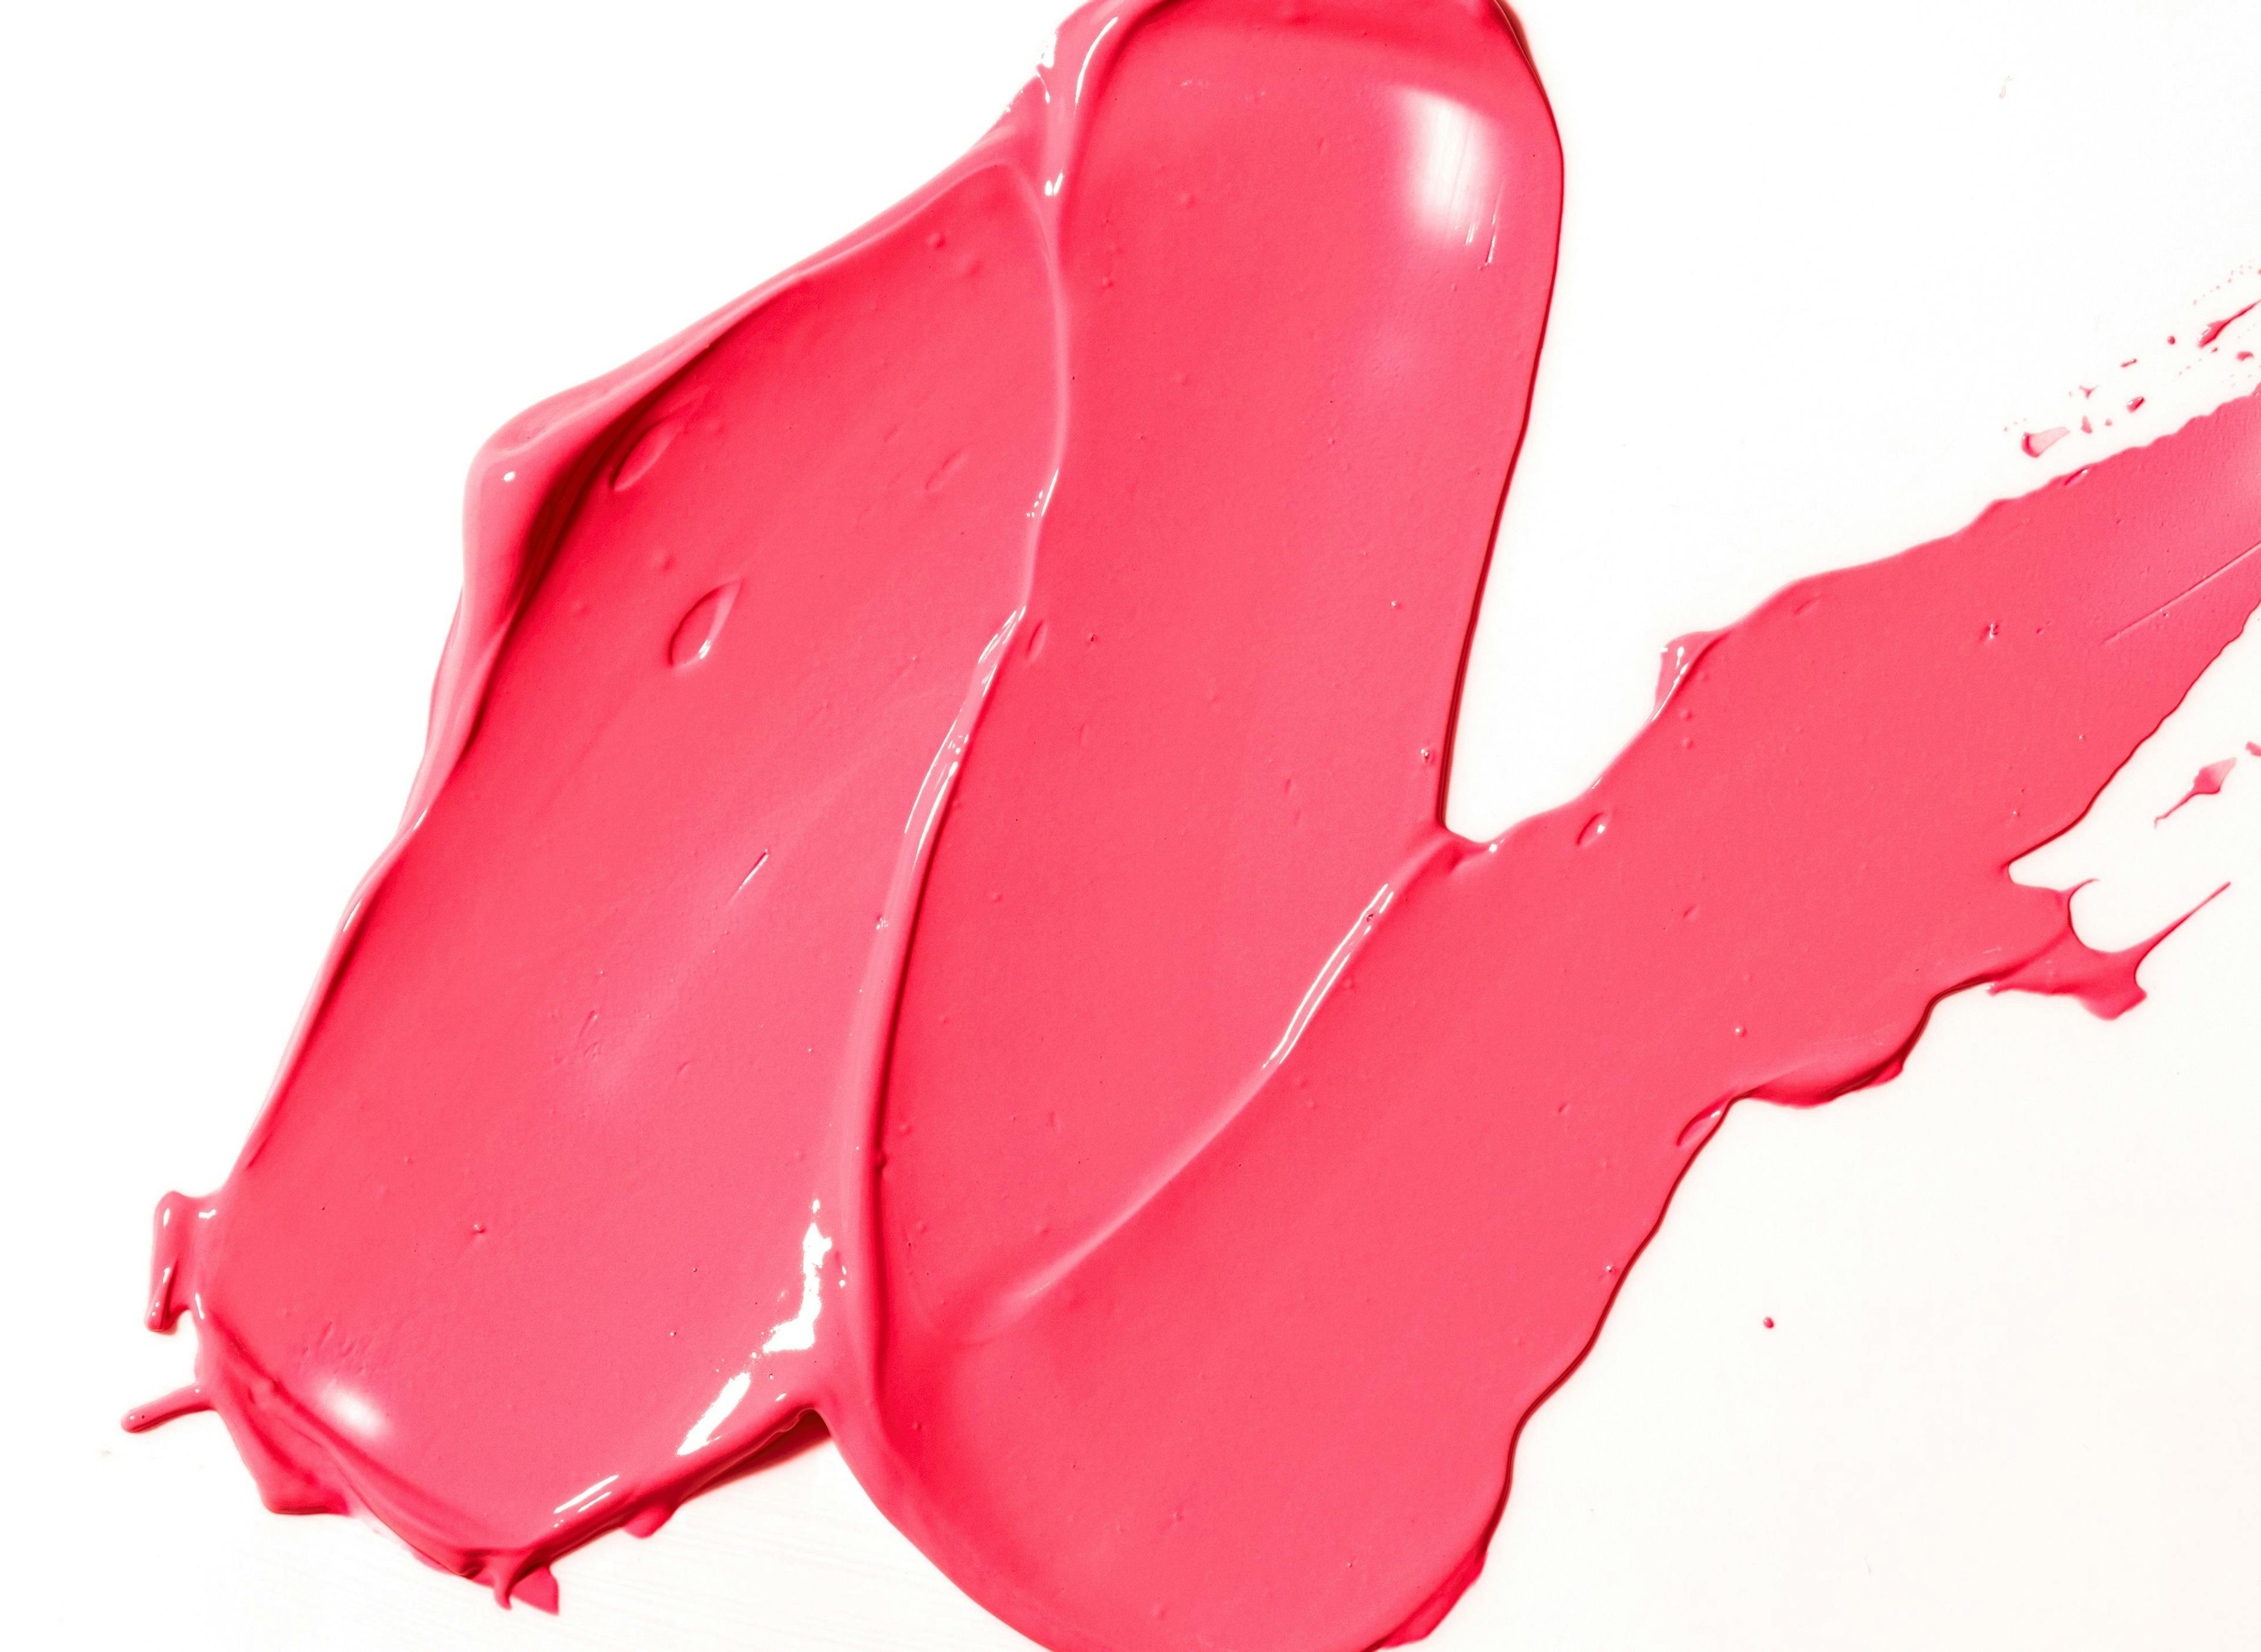 Pink putty spread on a white background